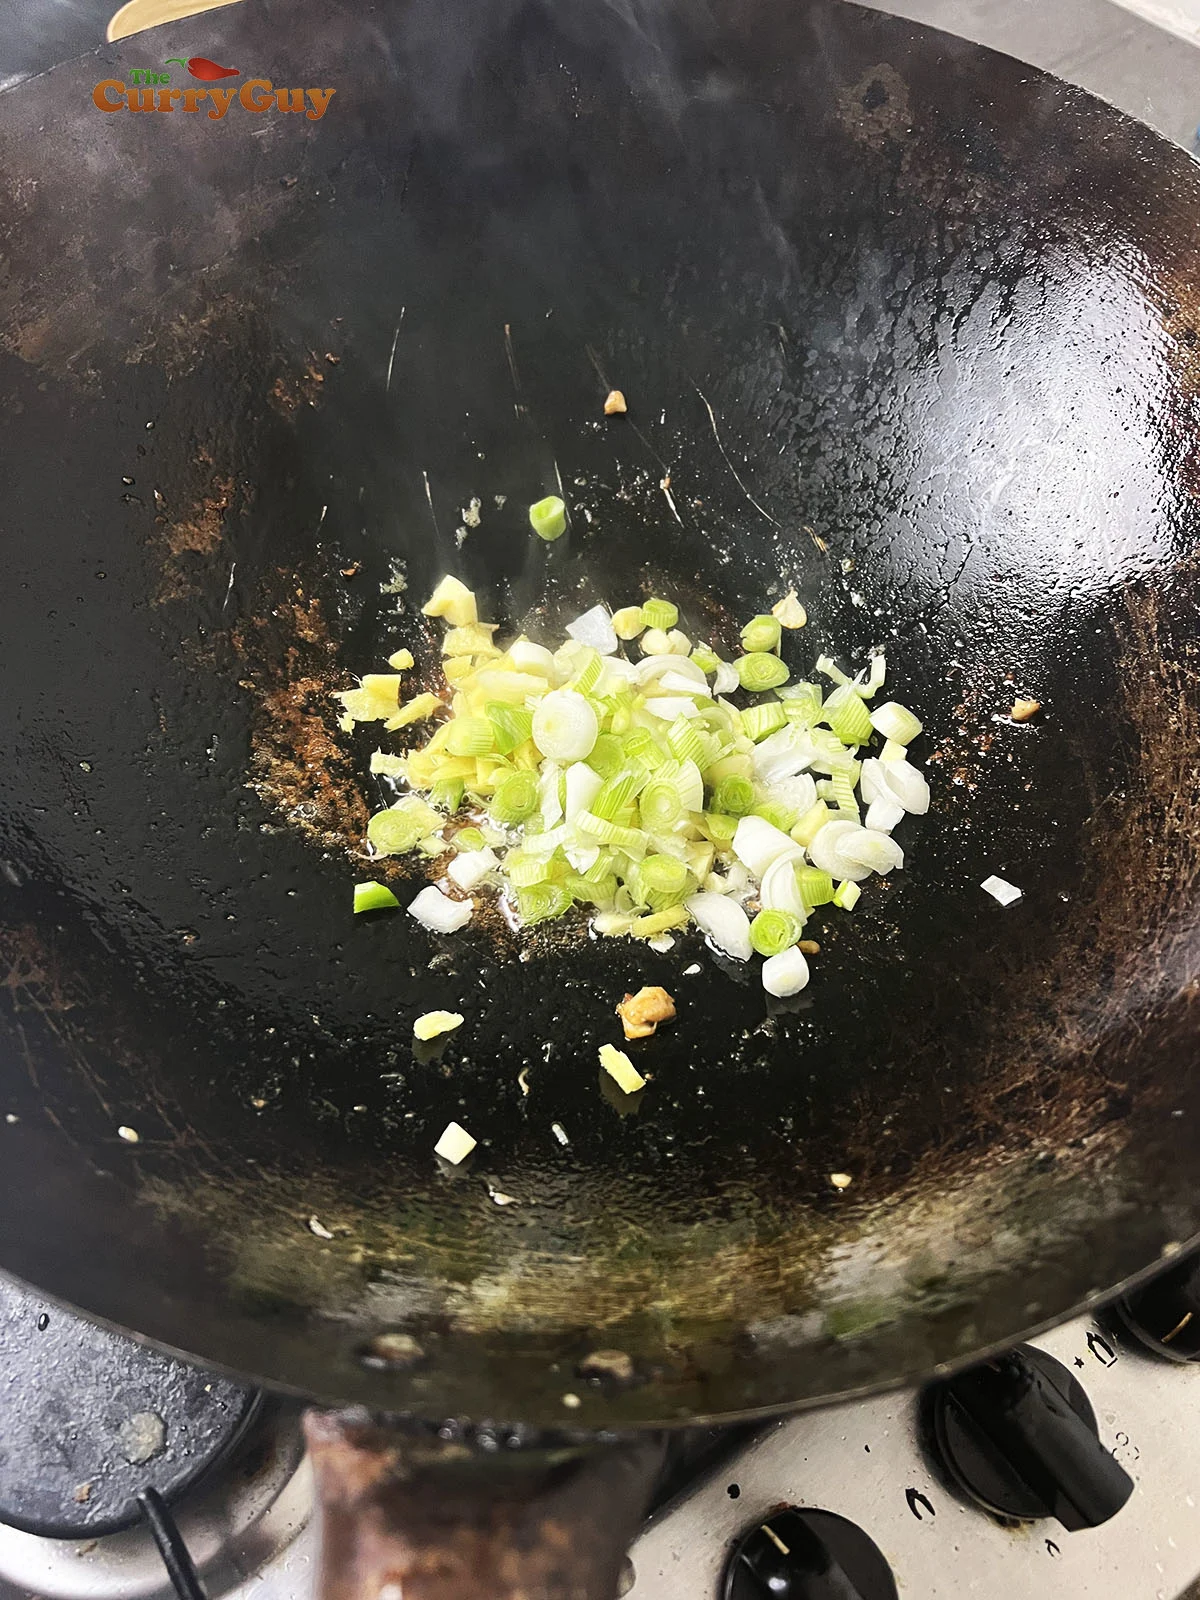 Frying aromatic ingredients in the wok.